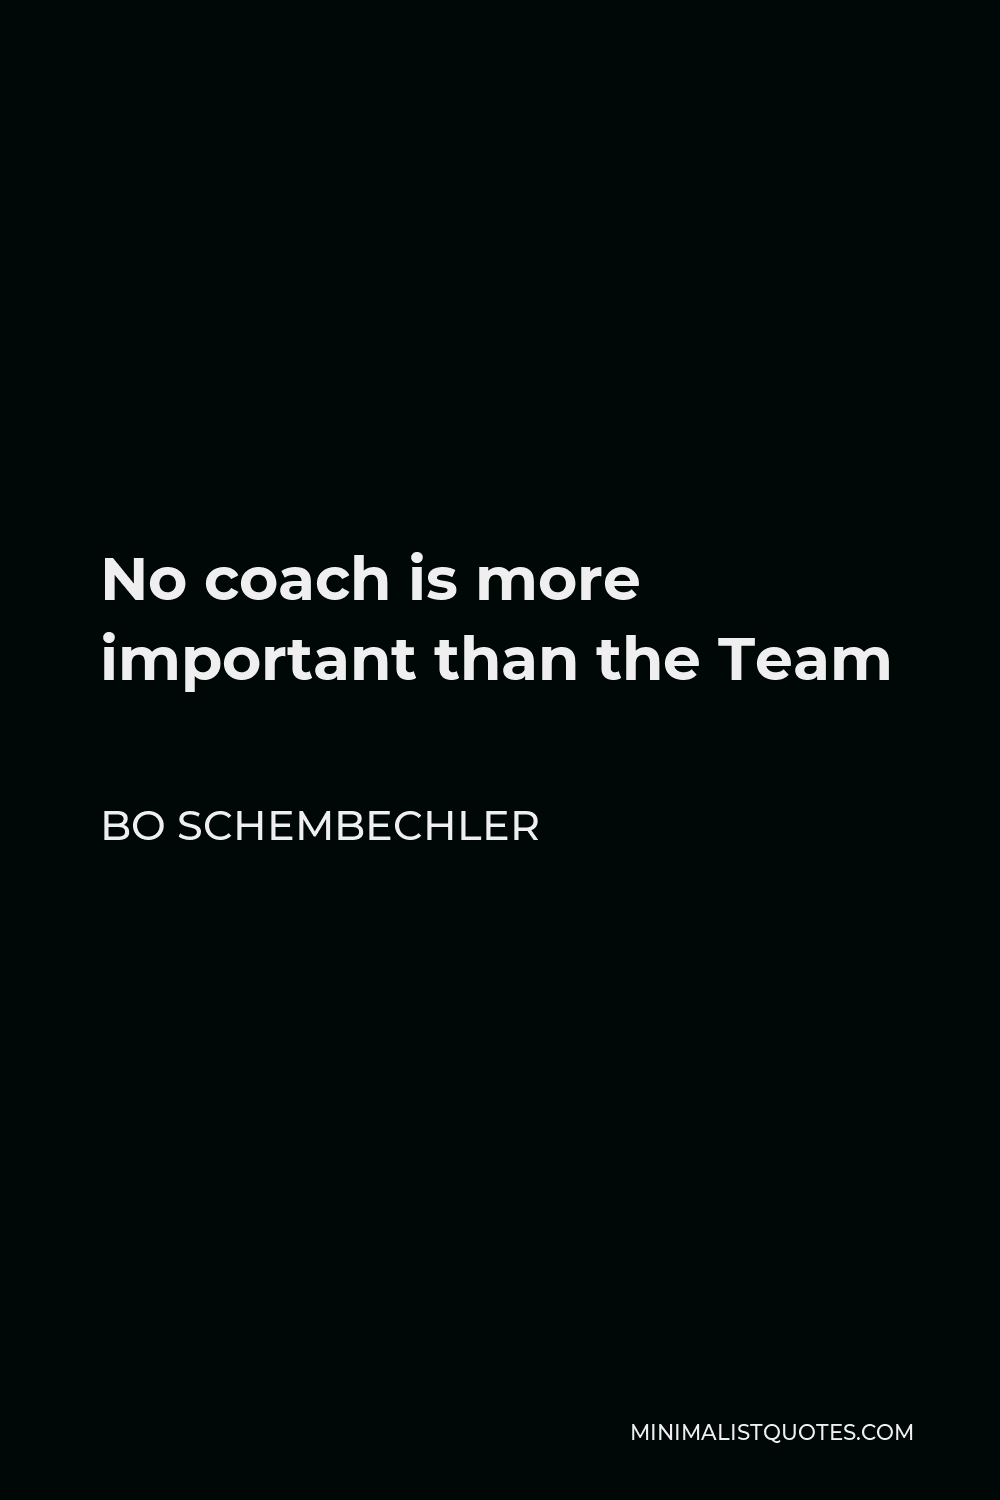 Bo Schembechler Quote - No coach is more important than the Team